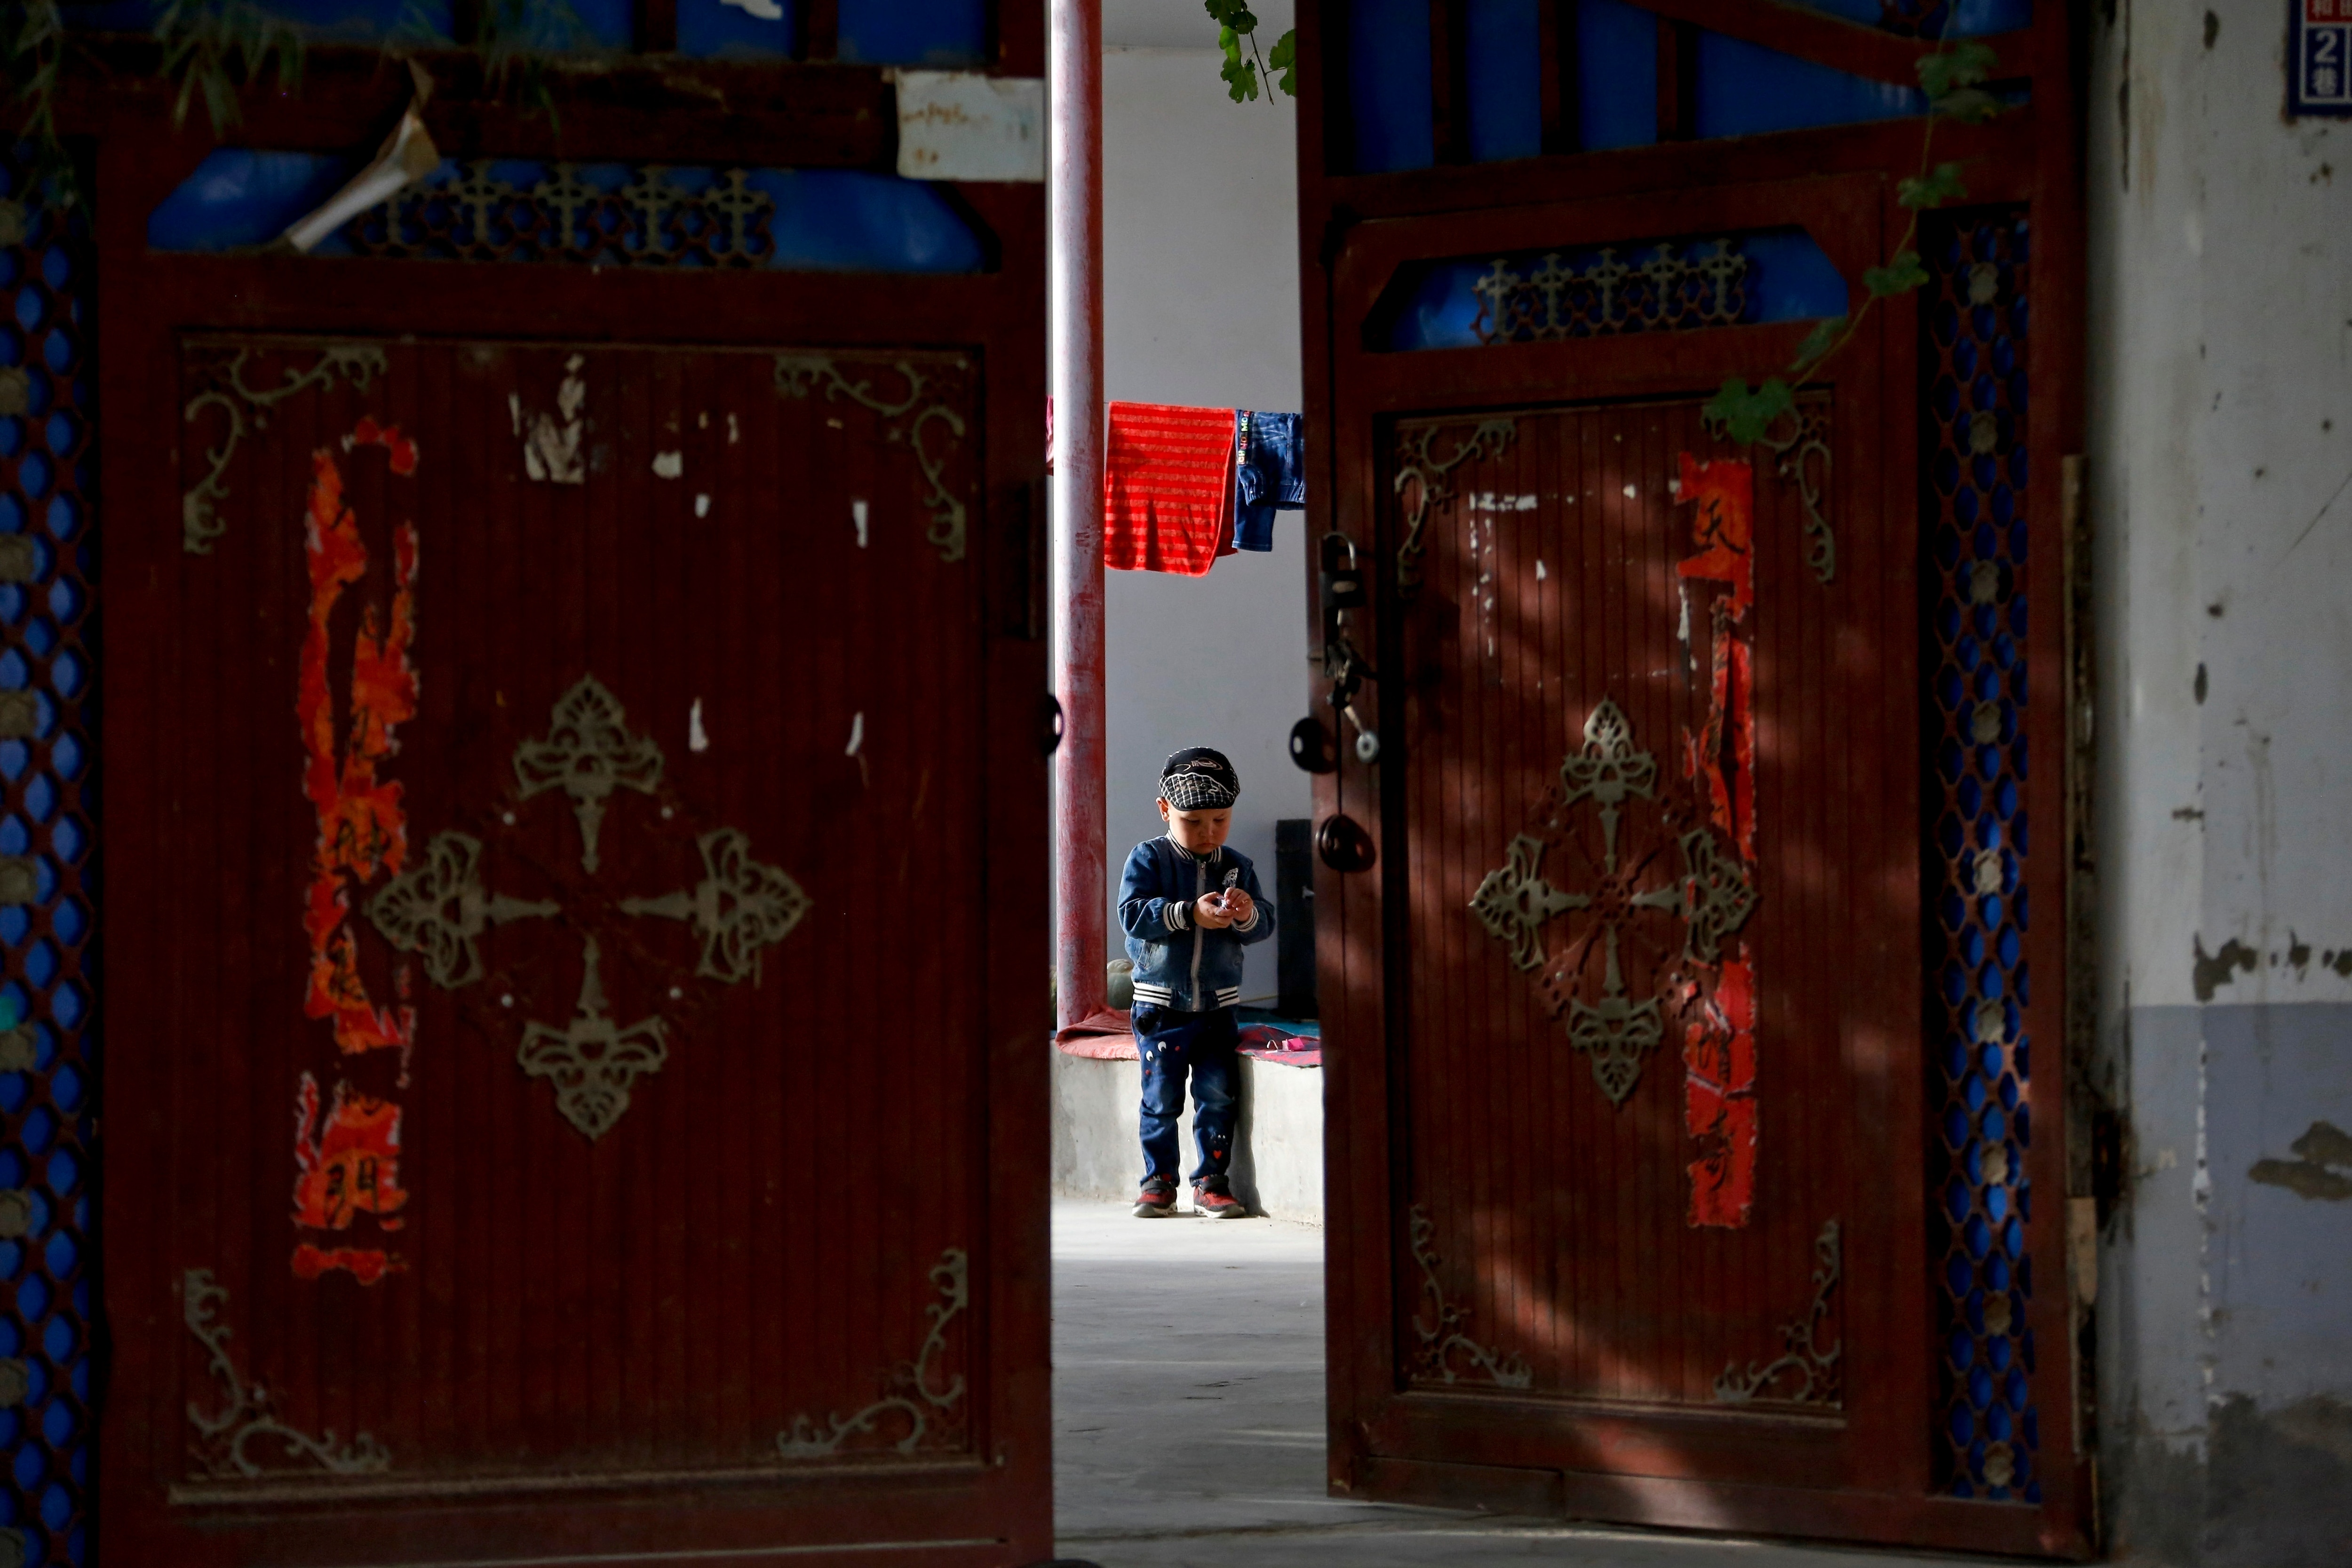 A Uighur child plays alone in the courtyard of a home at the Unity New Village in Hotan, in western China's Xinjiang region.